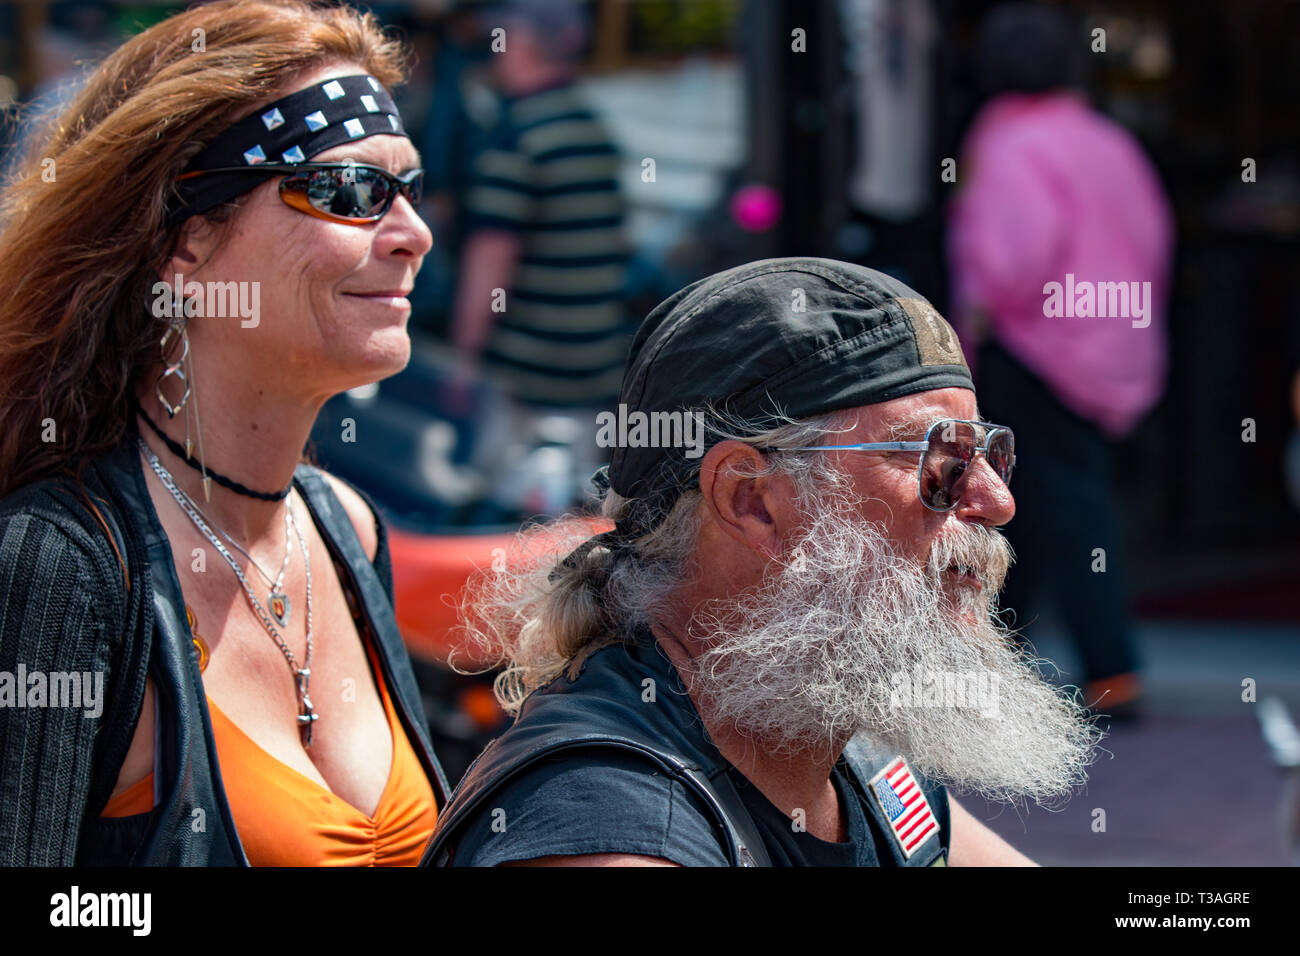 Daytona Beach, FL - 12 March 2016: Bearded bikers participating in the 75th Annual Bike Week at the World's Most Famous Beach. Stock Photo